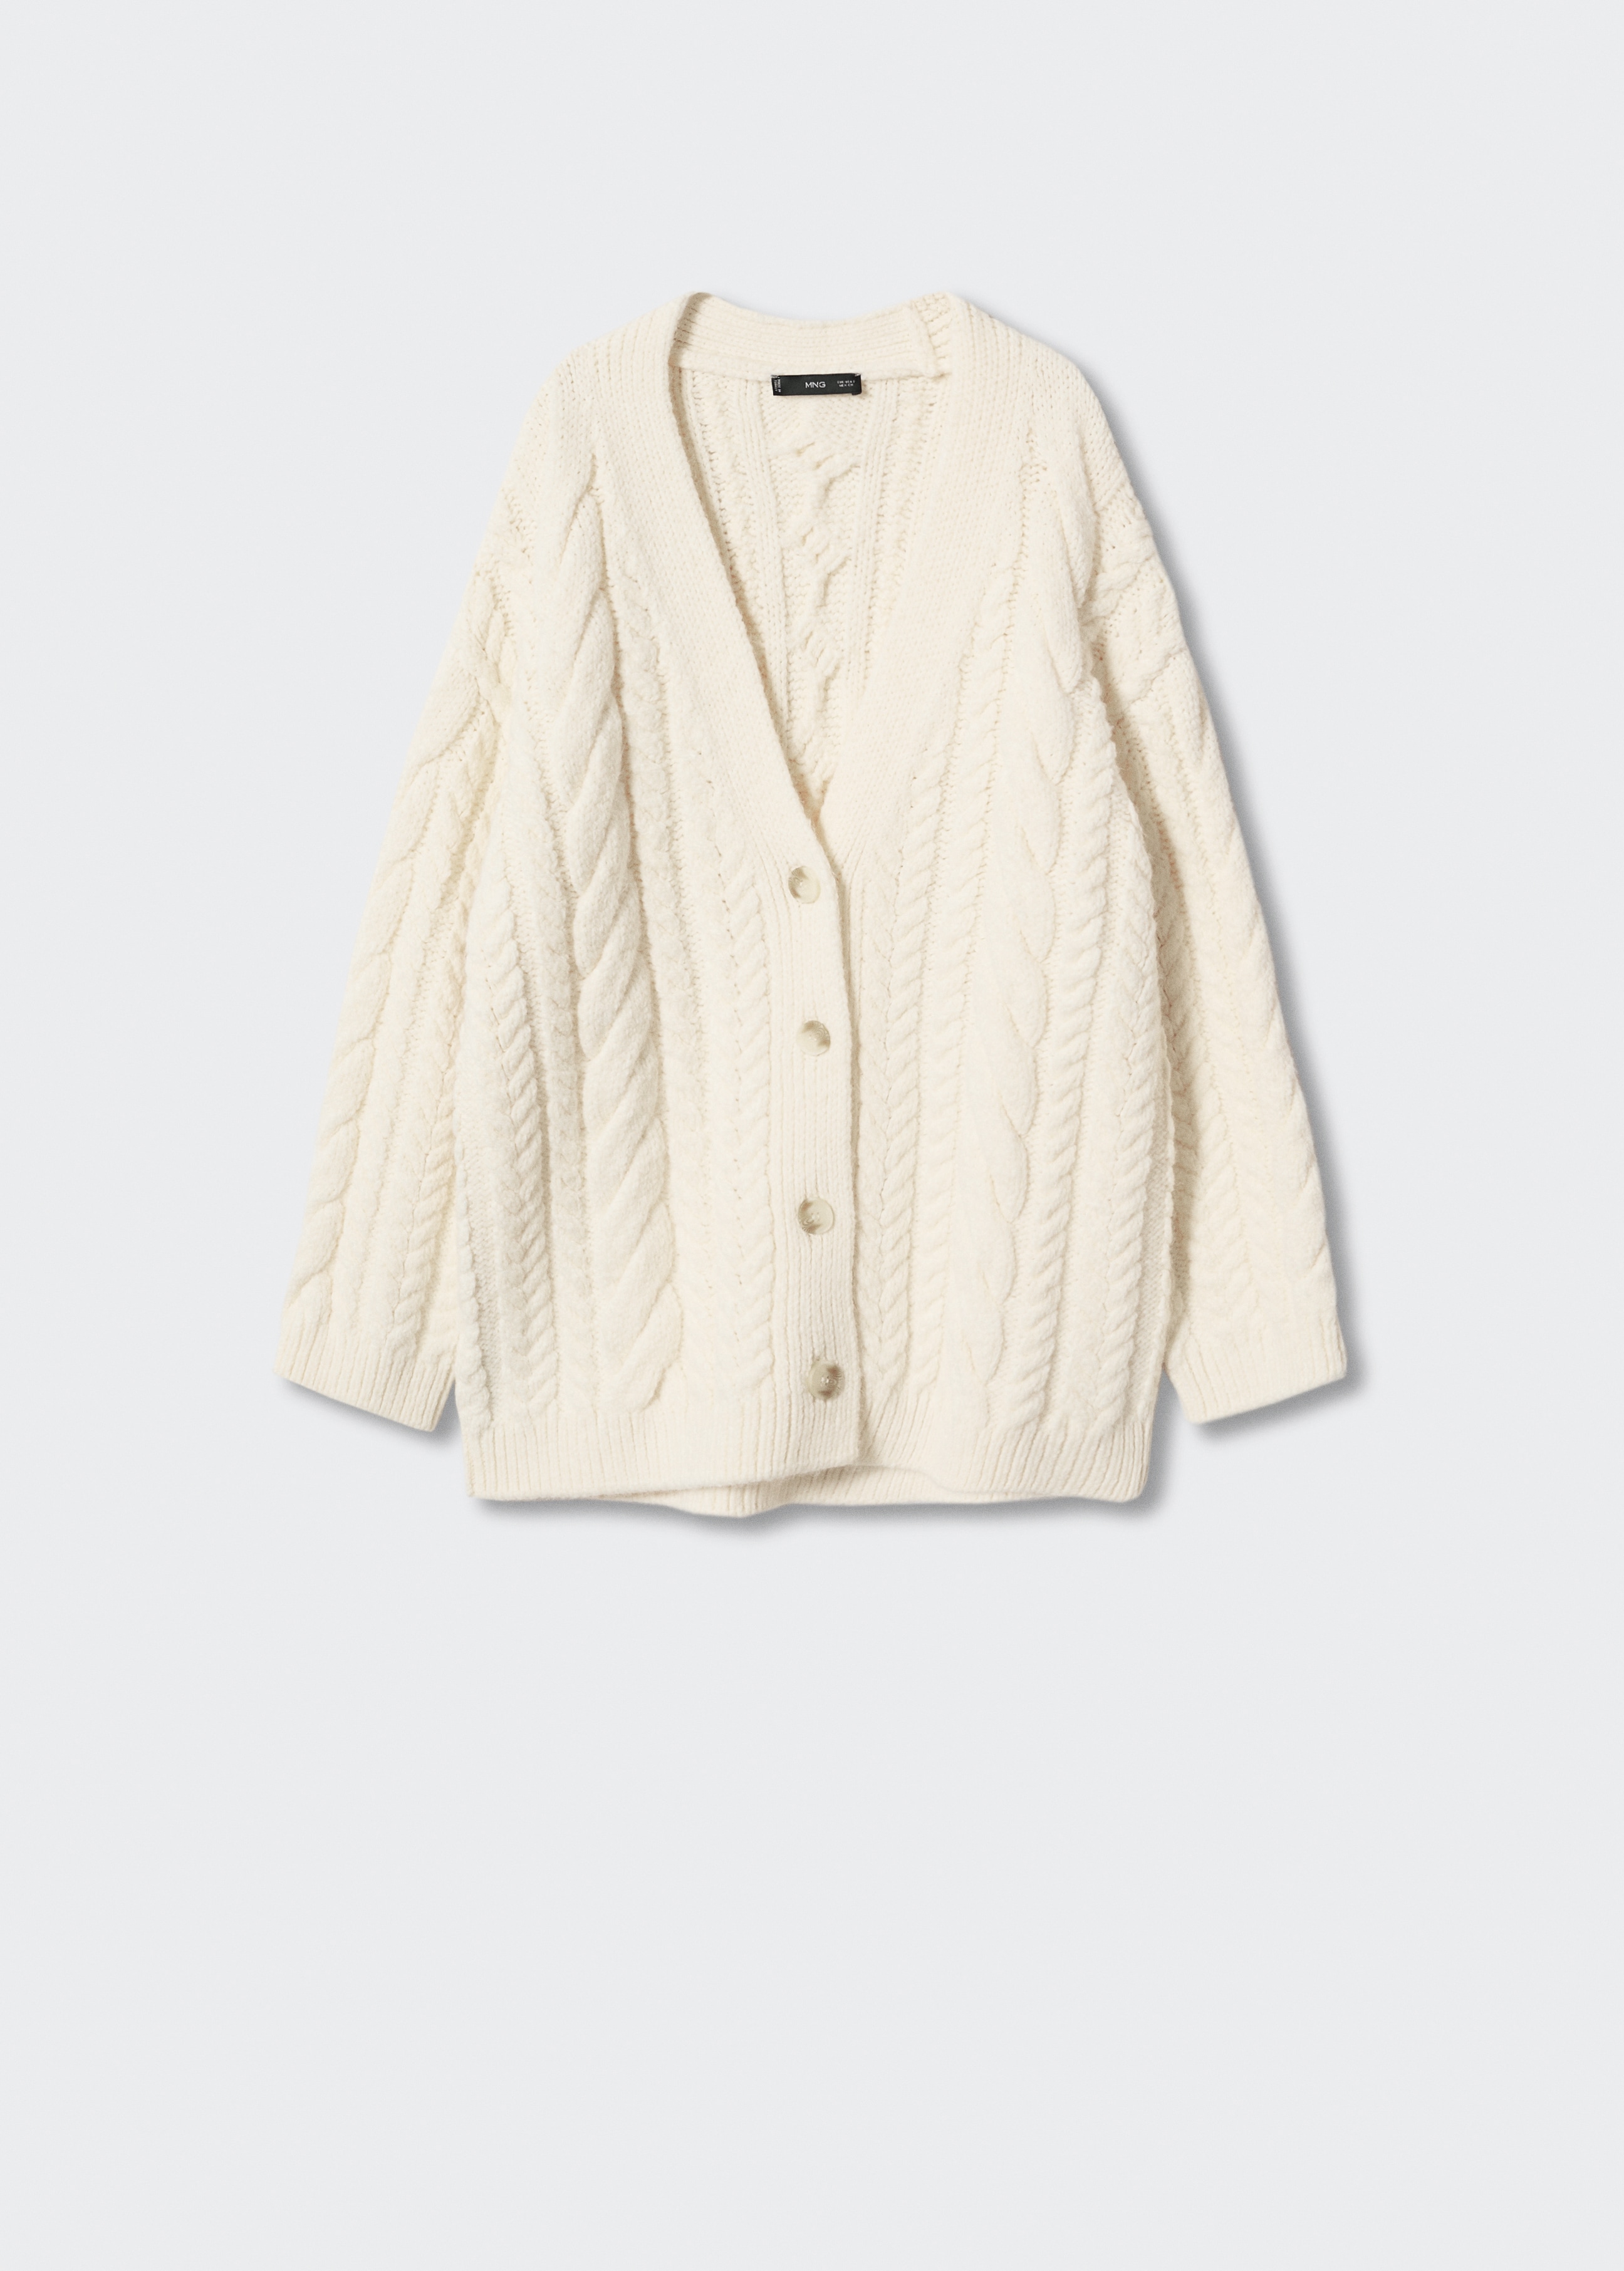 Buttoned knit braided cardigan - Article without model